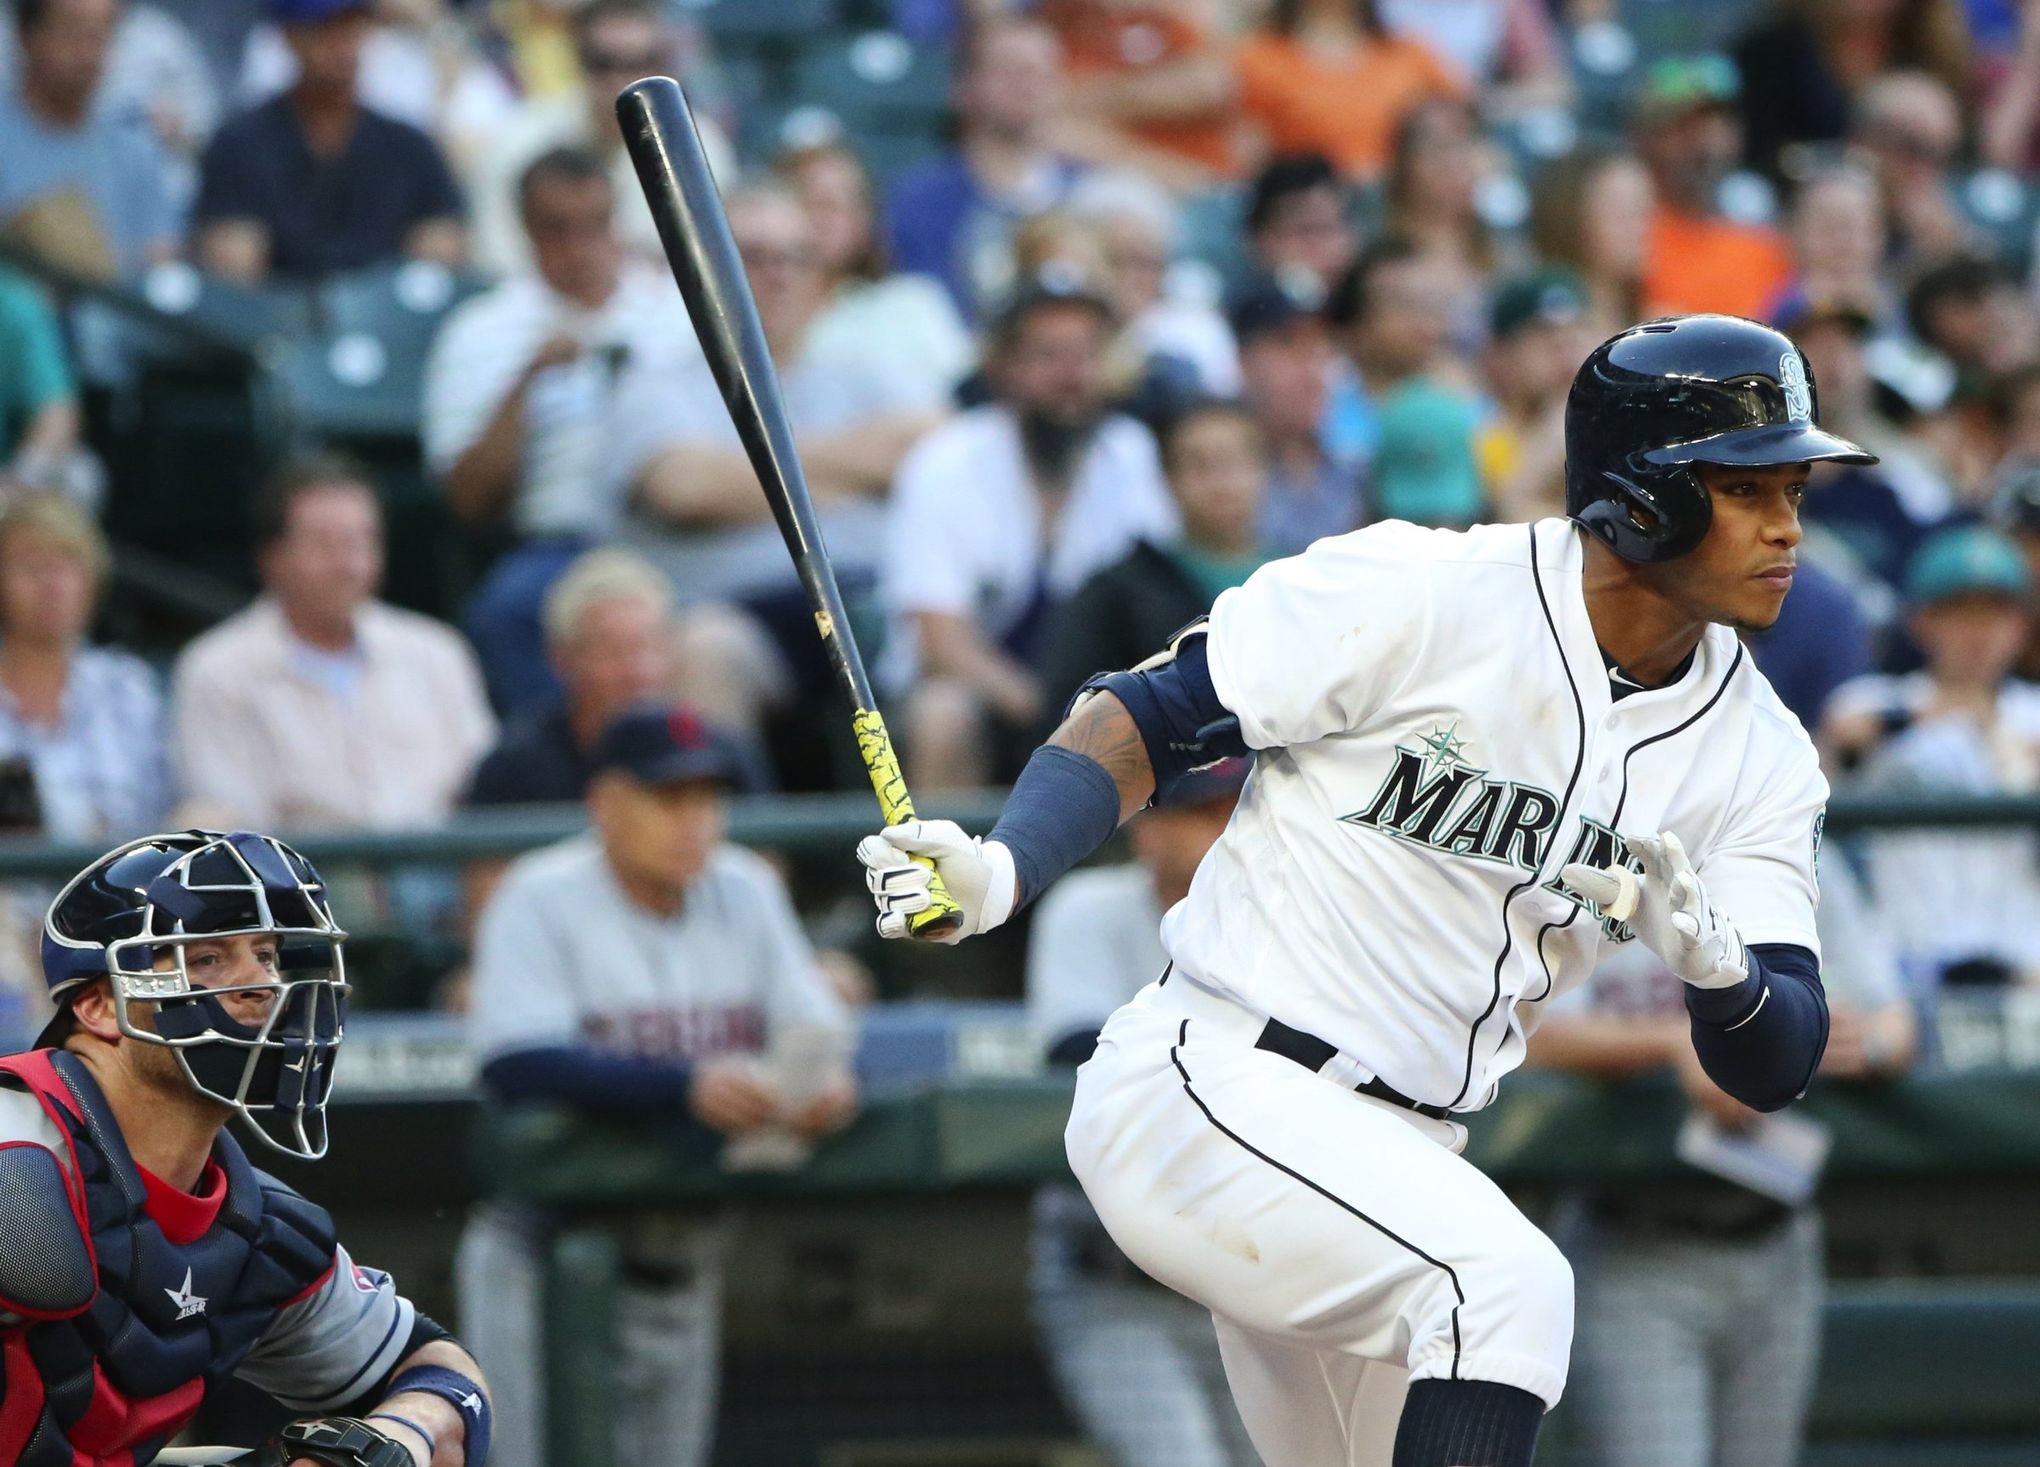 Still too early to know when Mariners' Ketel Marte will return from DL